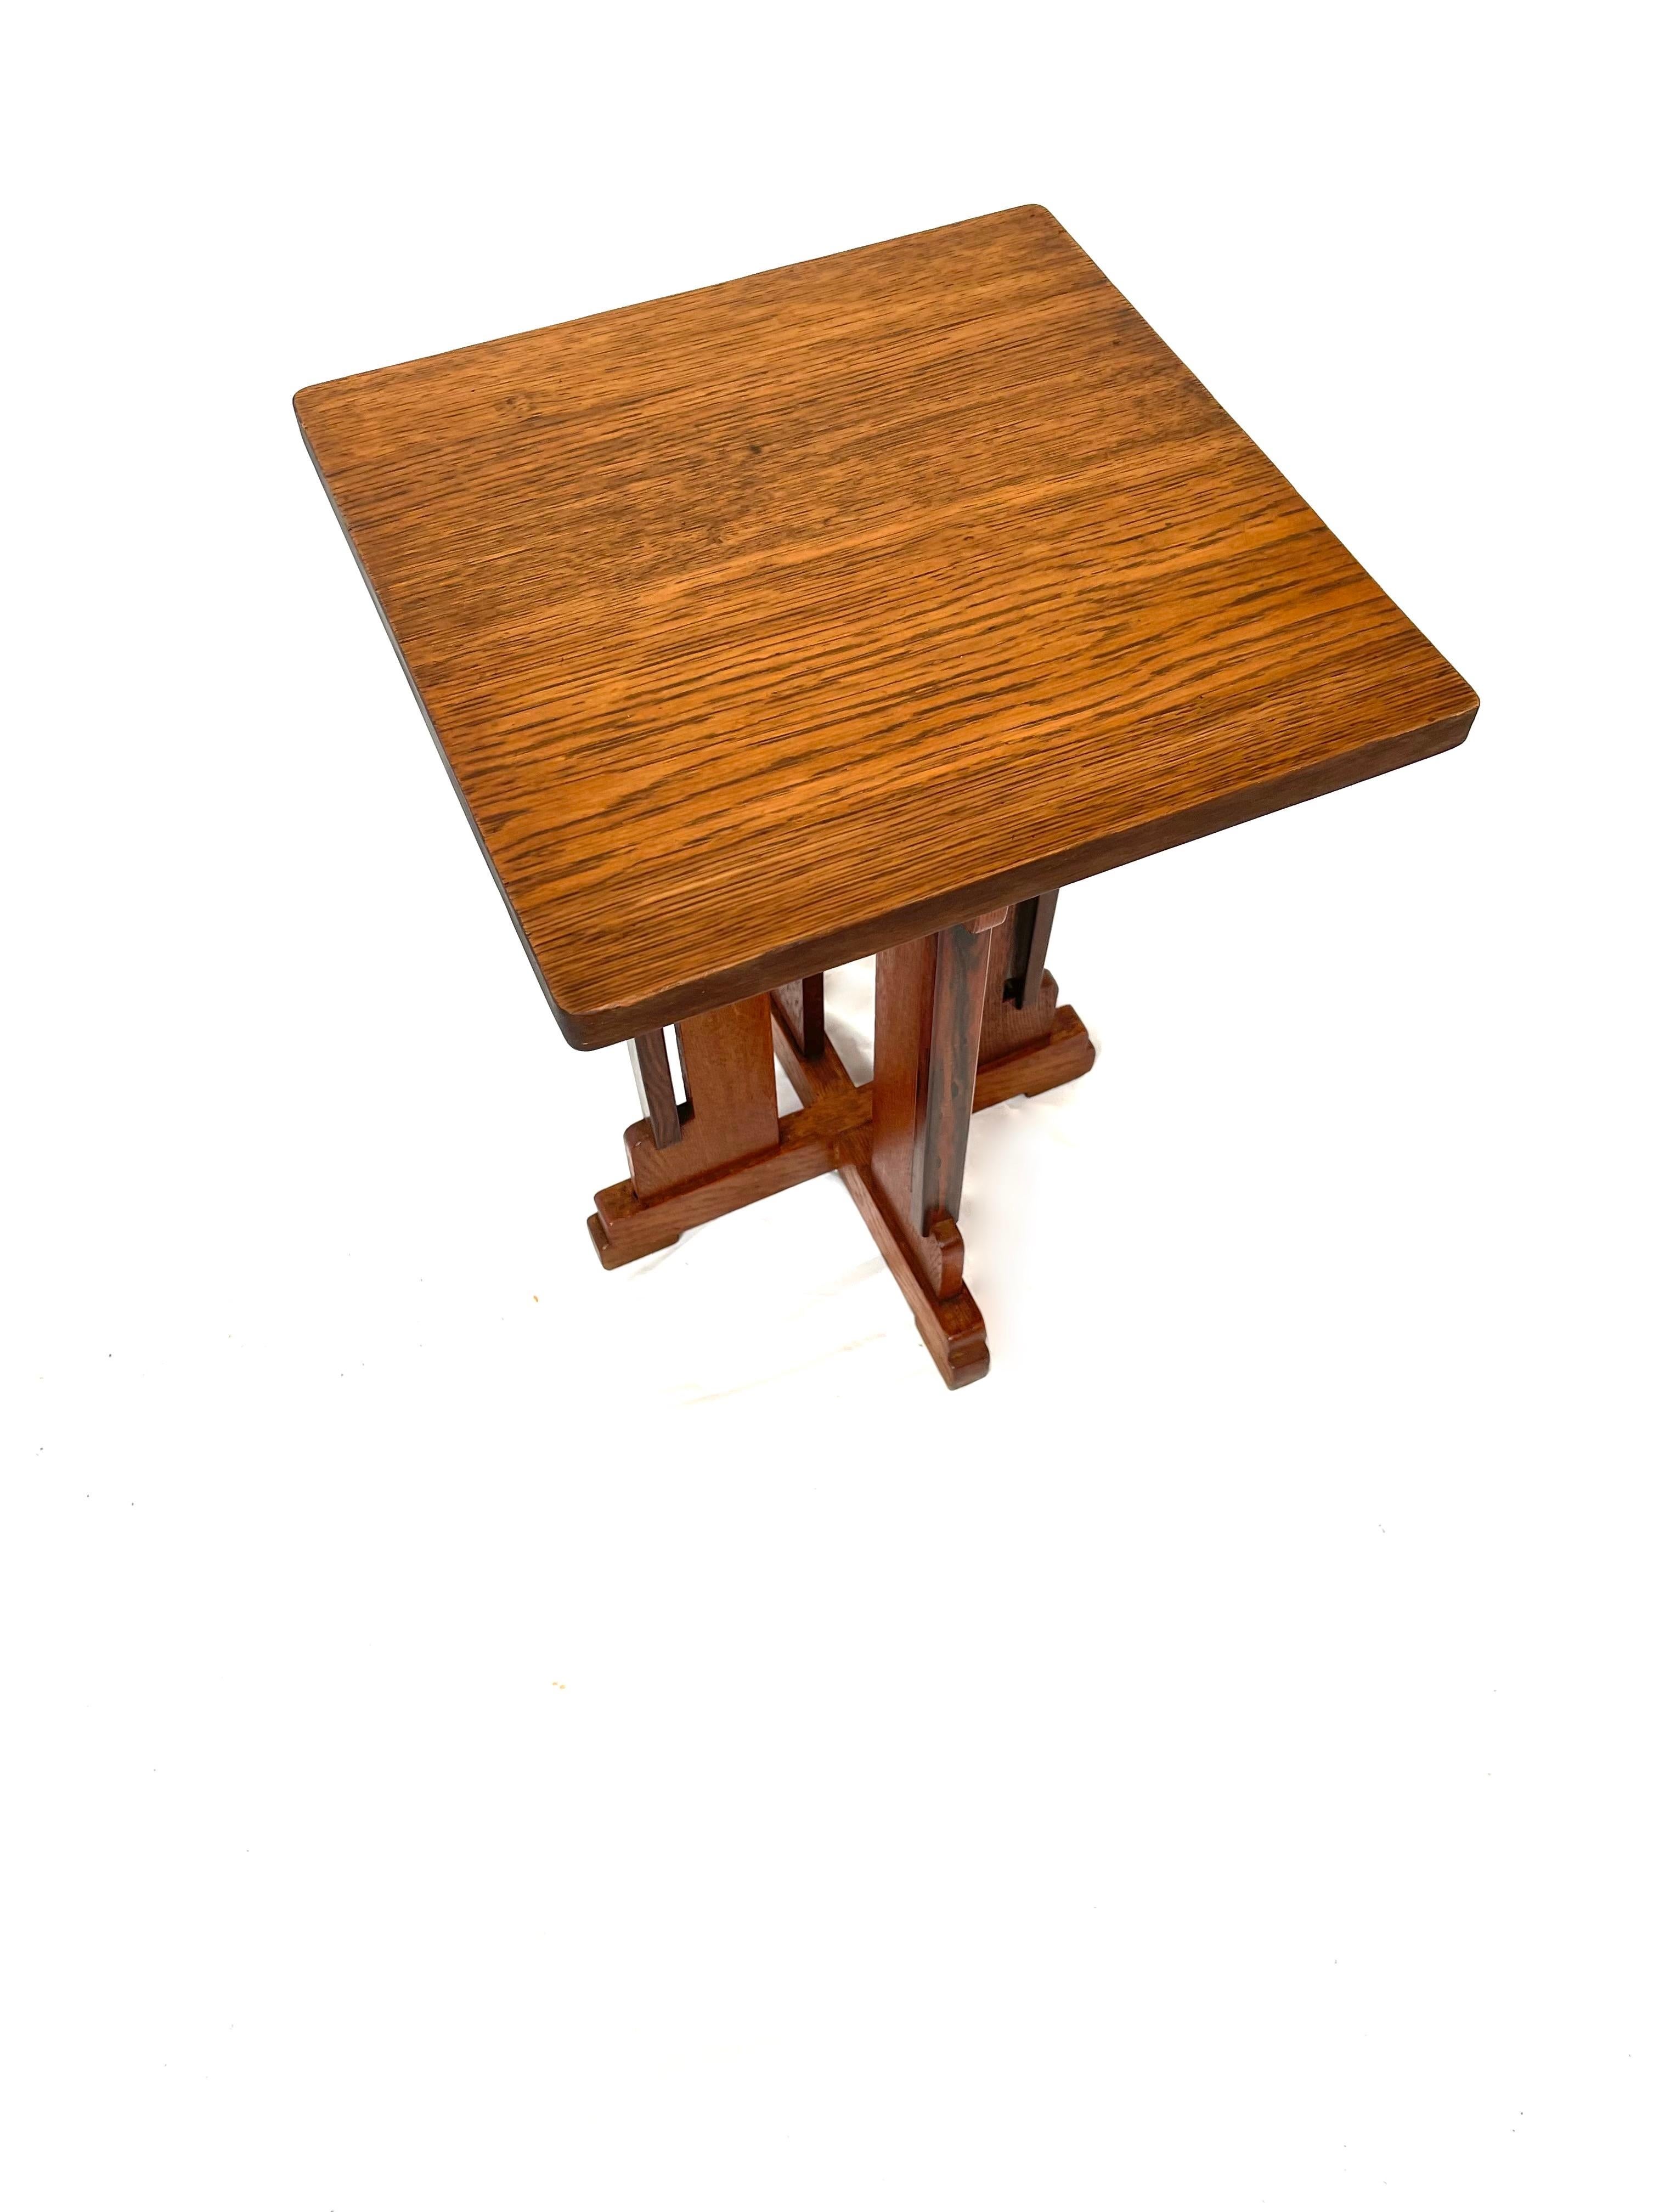 Rare and Handcrafted Dutch Arts & Crafts Oak End Table, Plant Stand P.E.L.Izeren For Sale 13